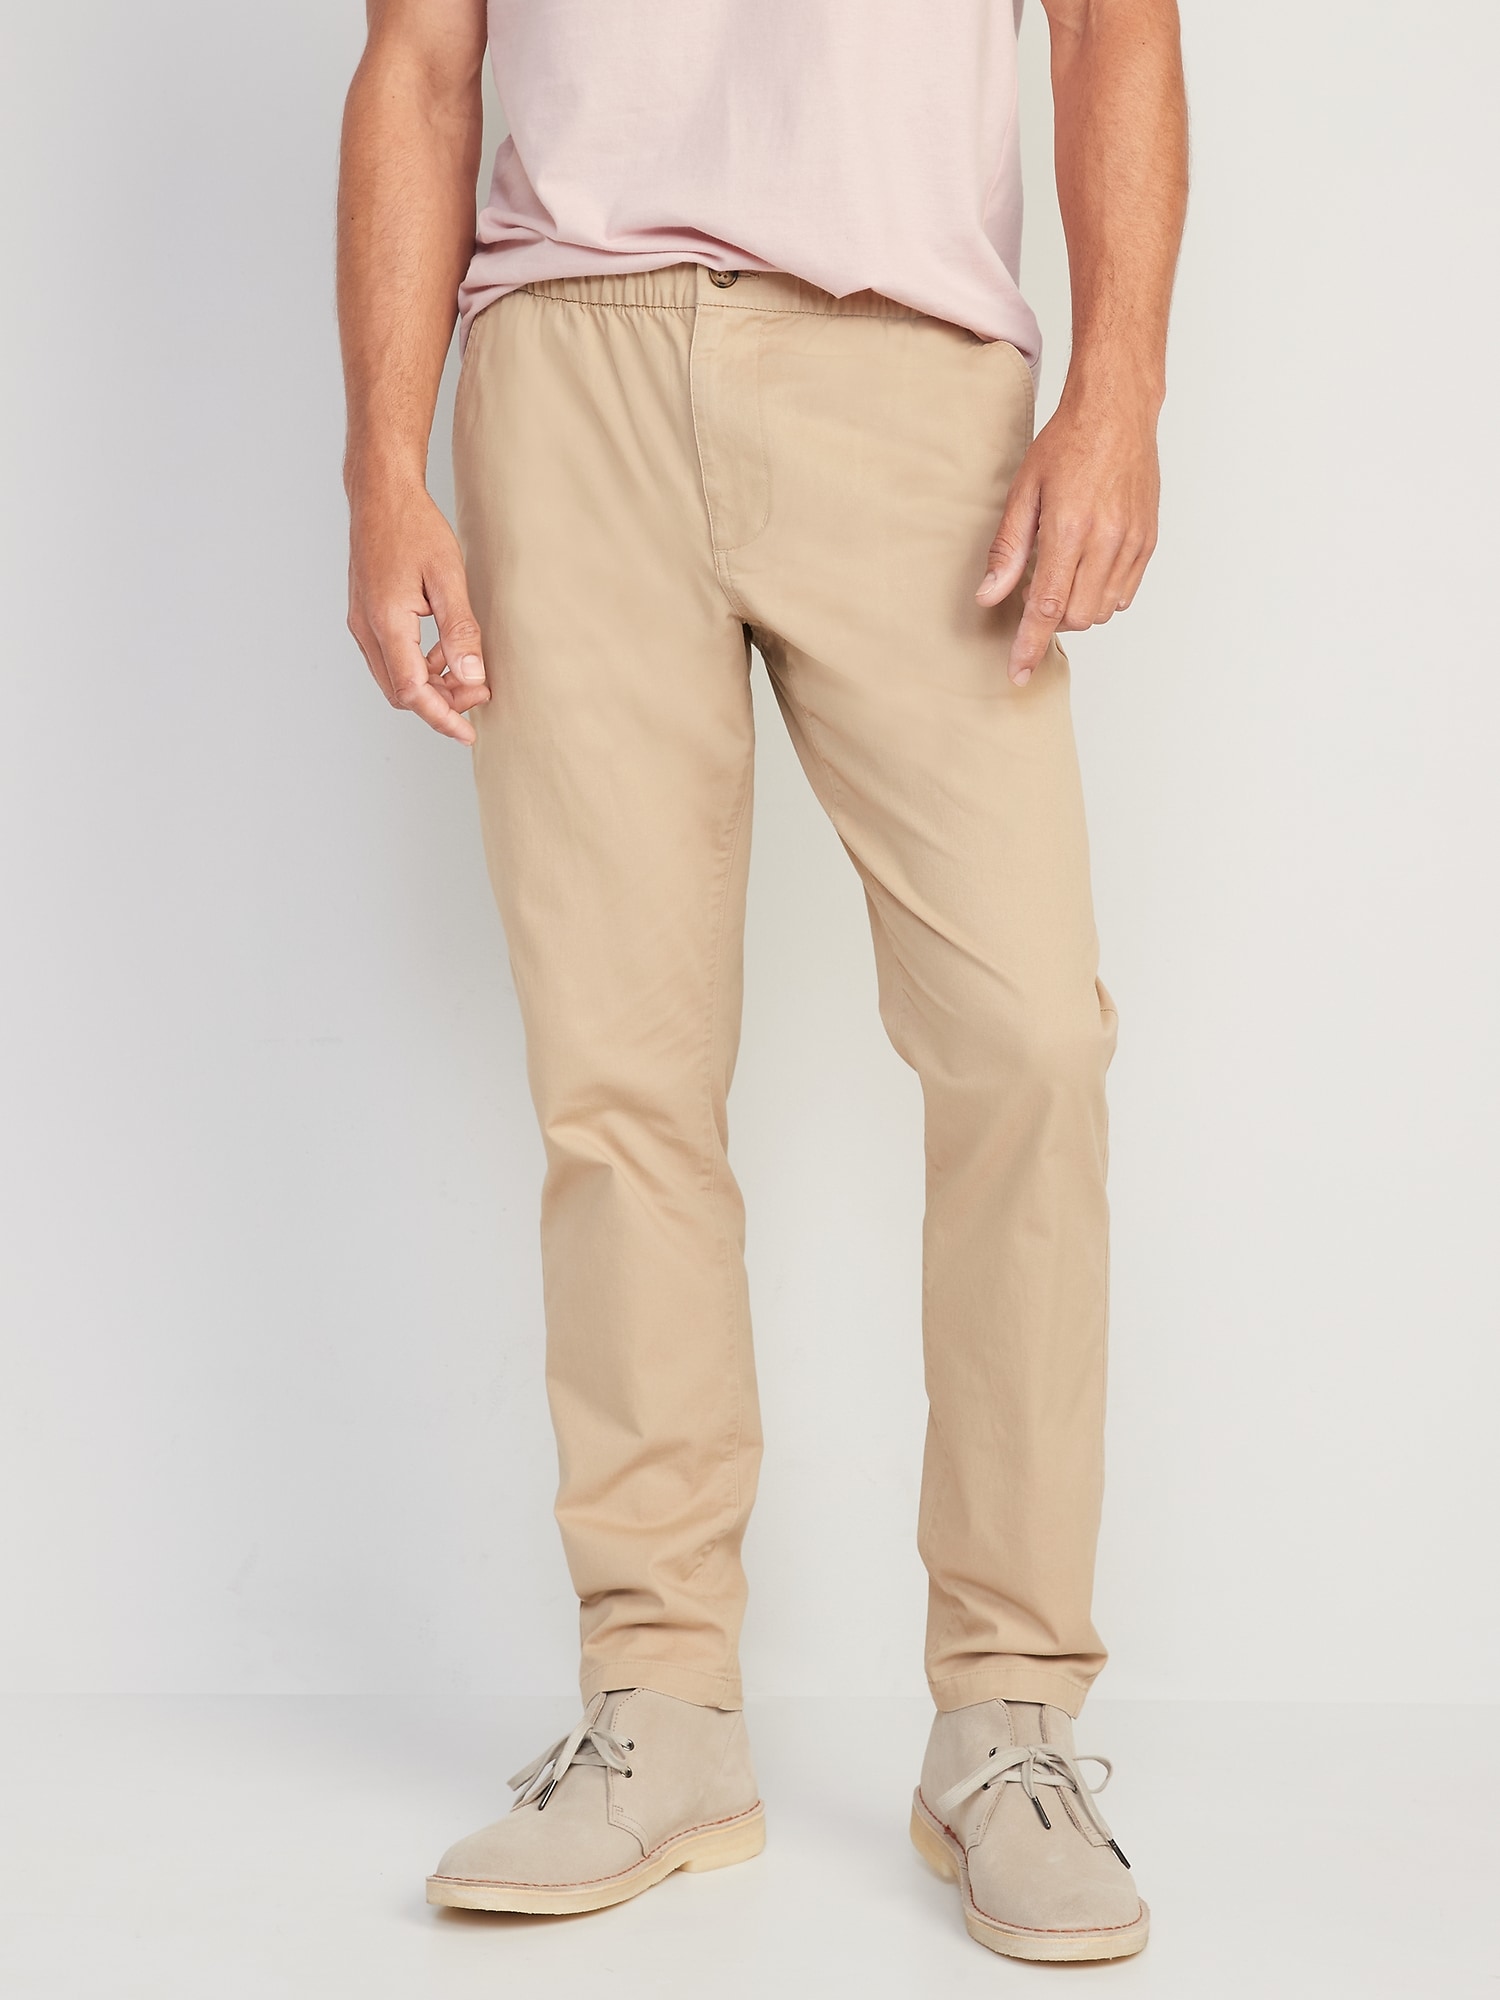 Men's Easy Pull On Elasticated Waist Cotton Chinos